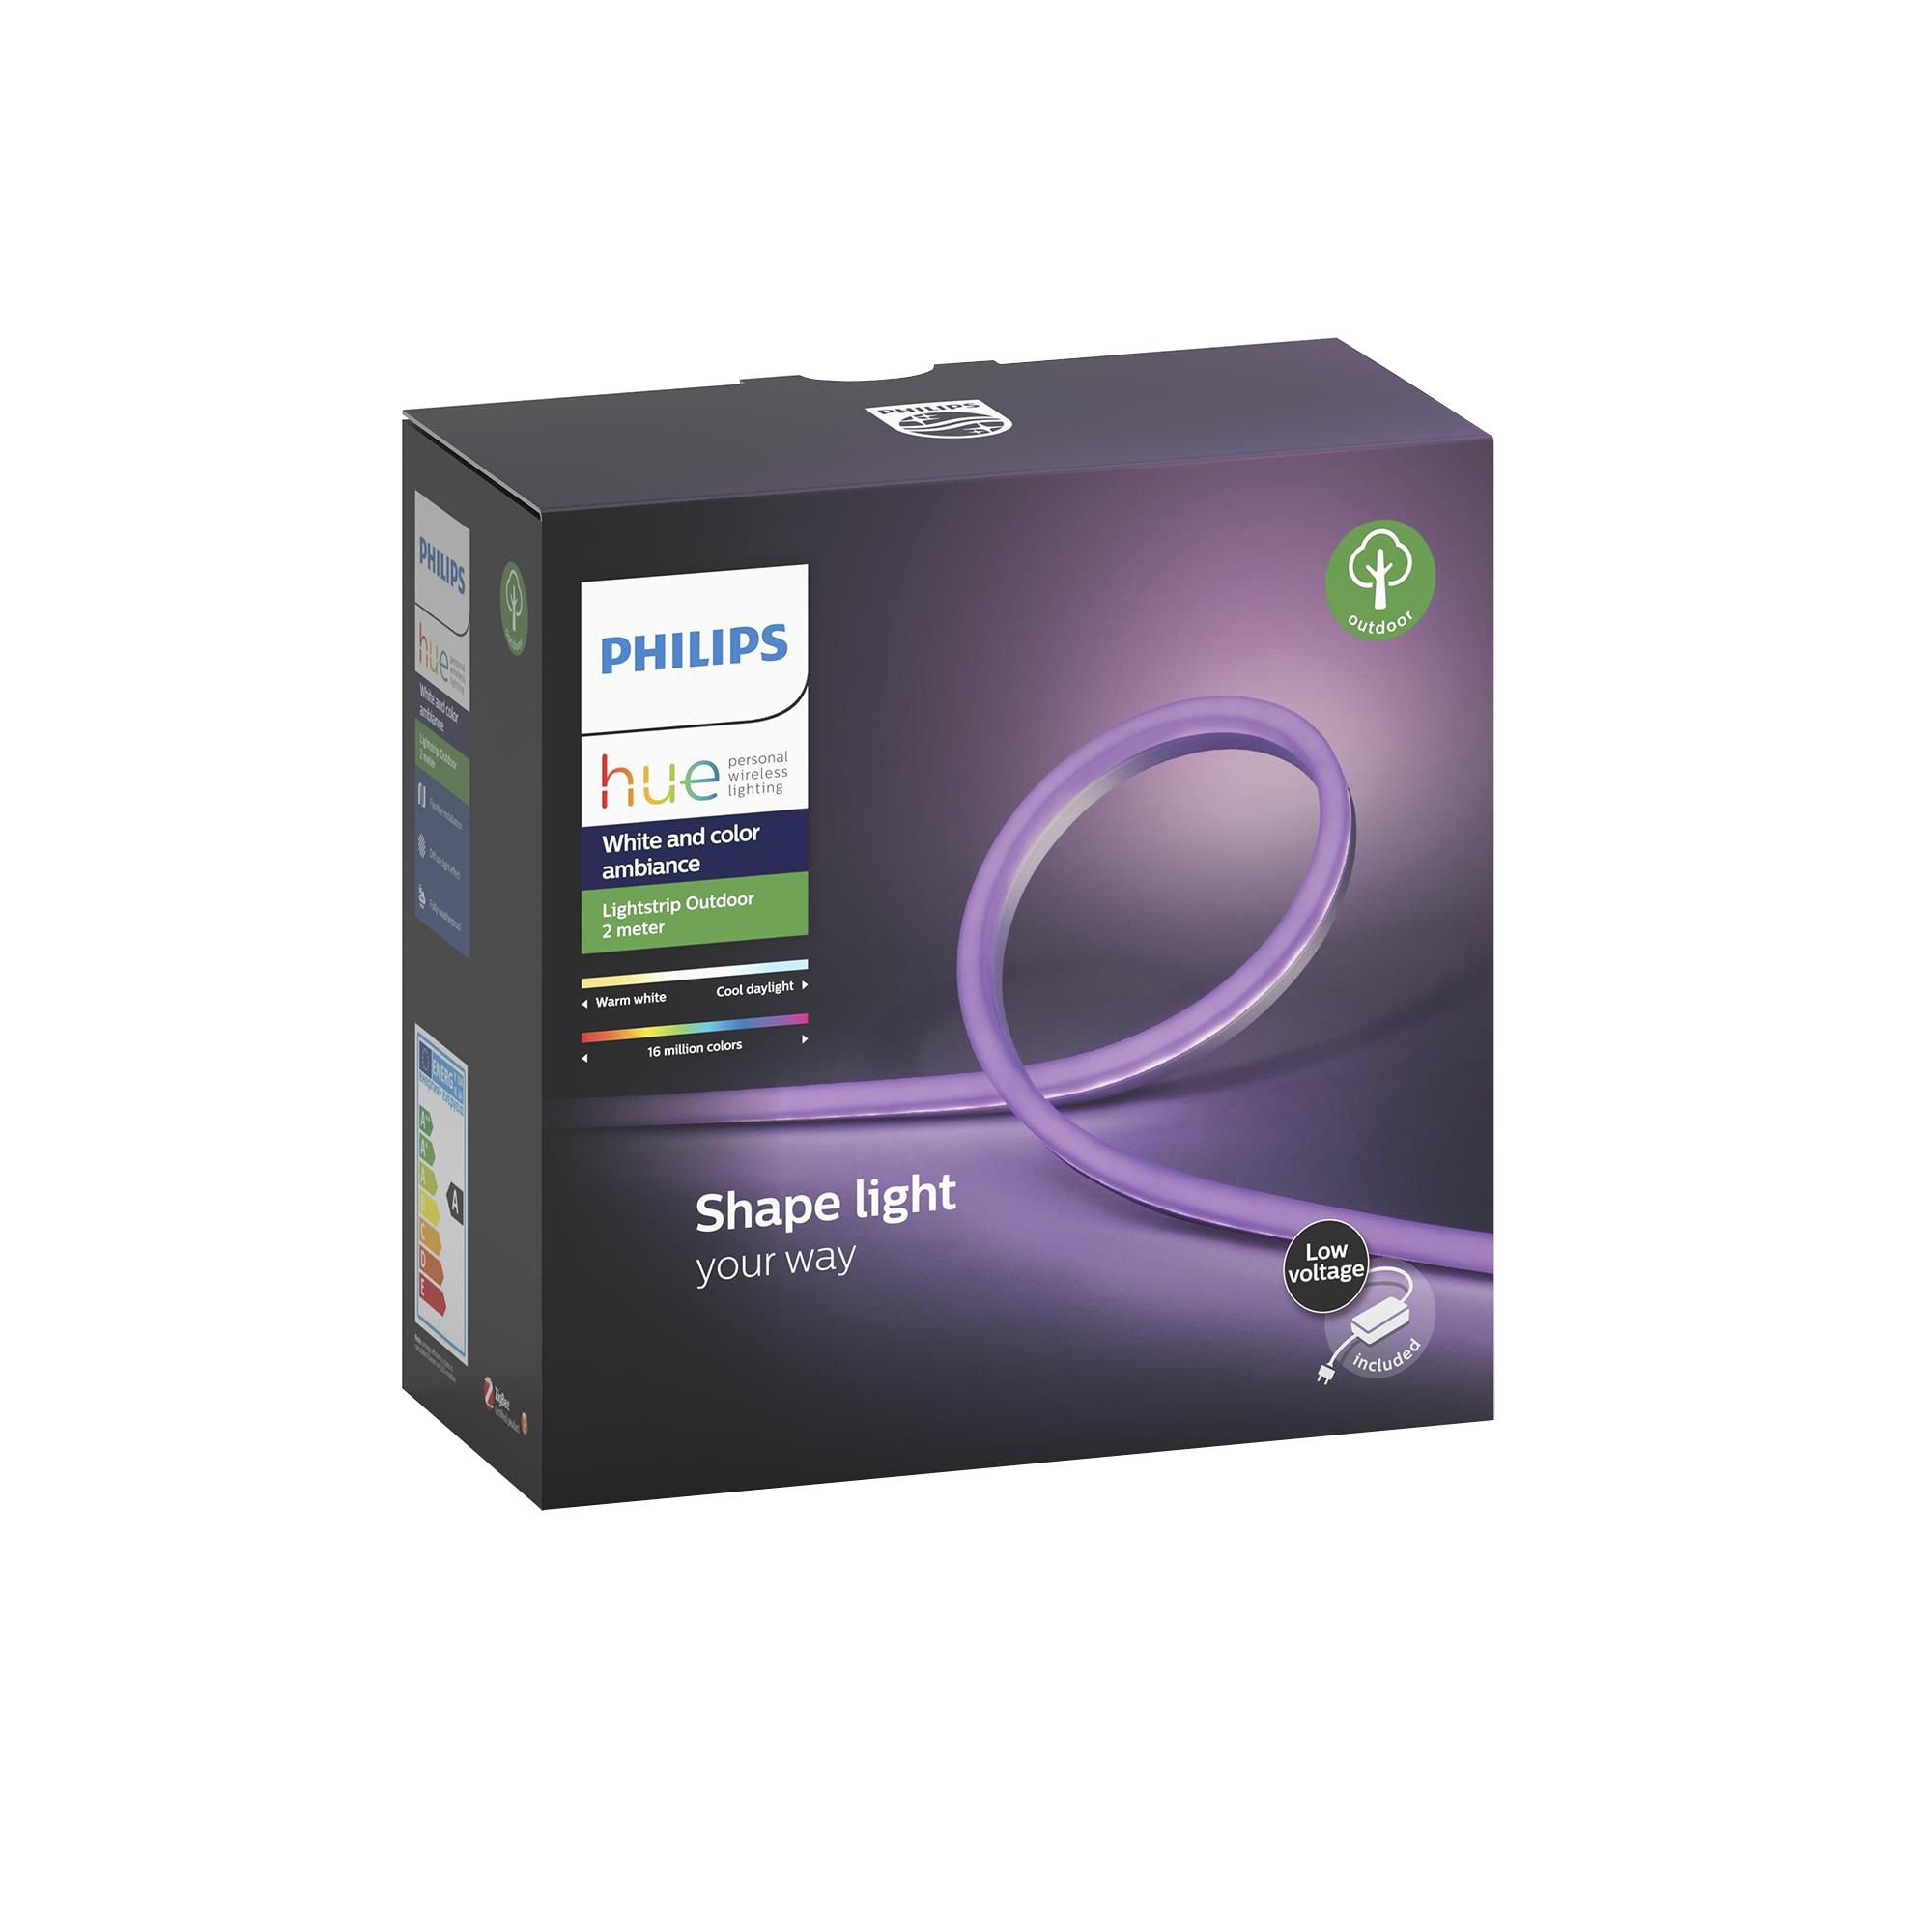 Philips Hue - Lightstrip Outdoor White & Color Ambiance 2m - Neue